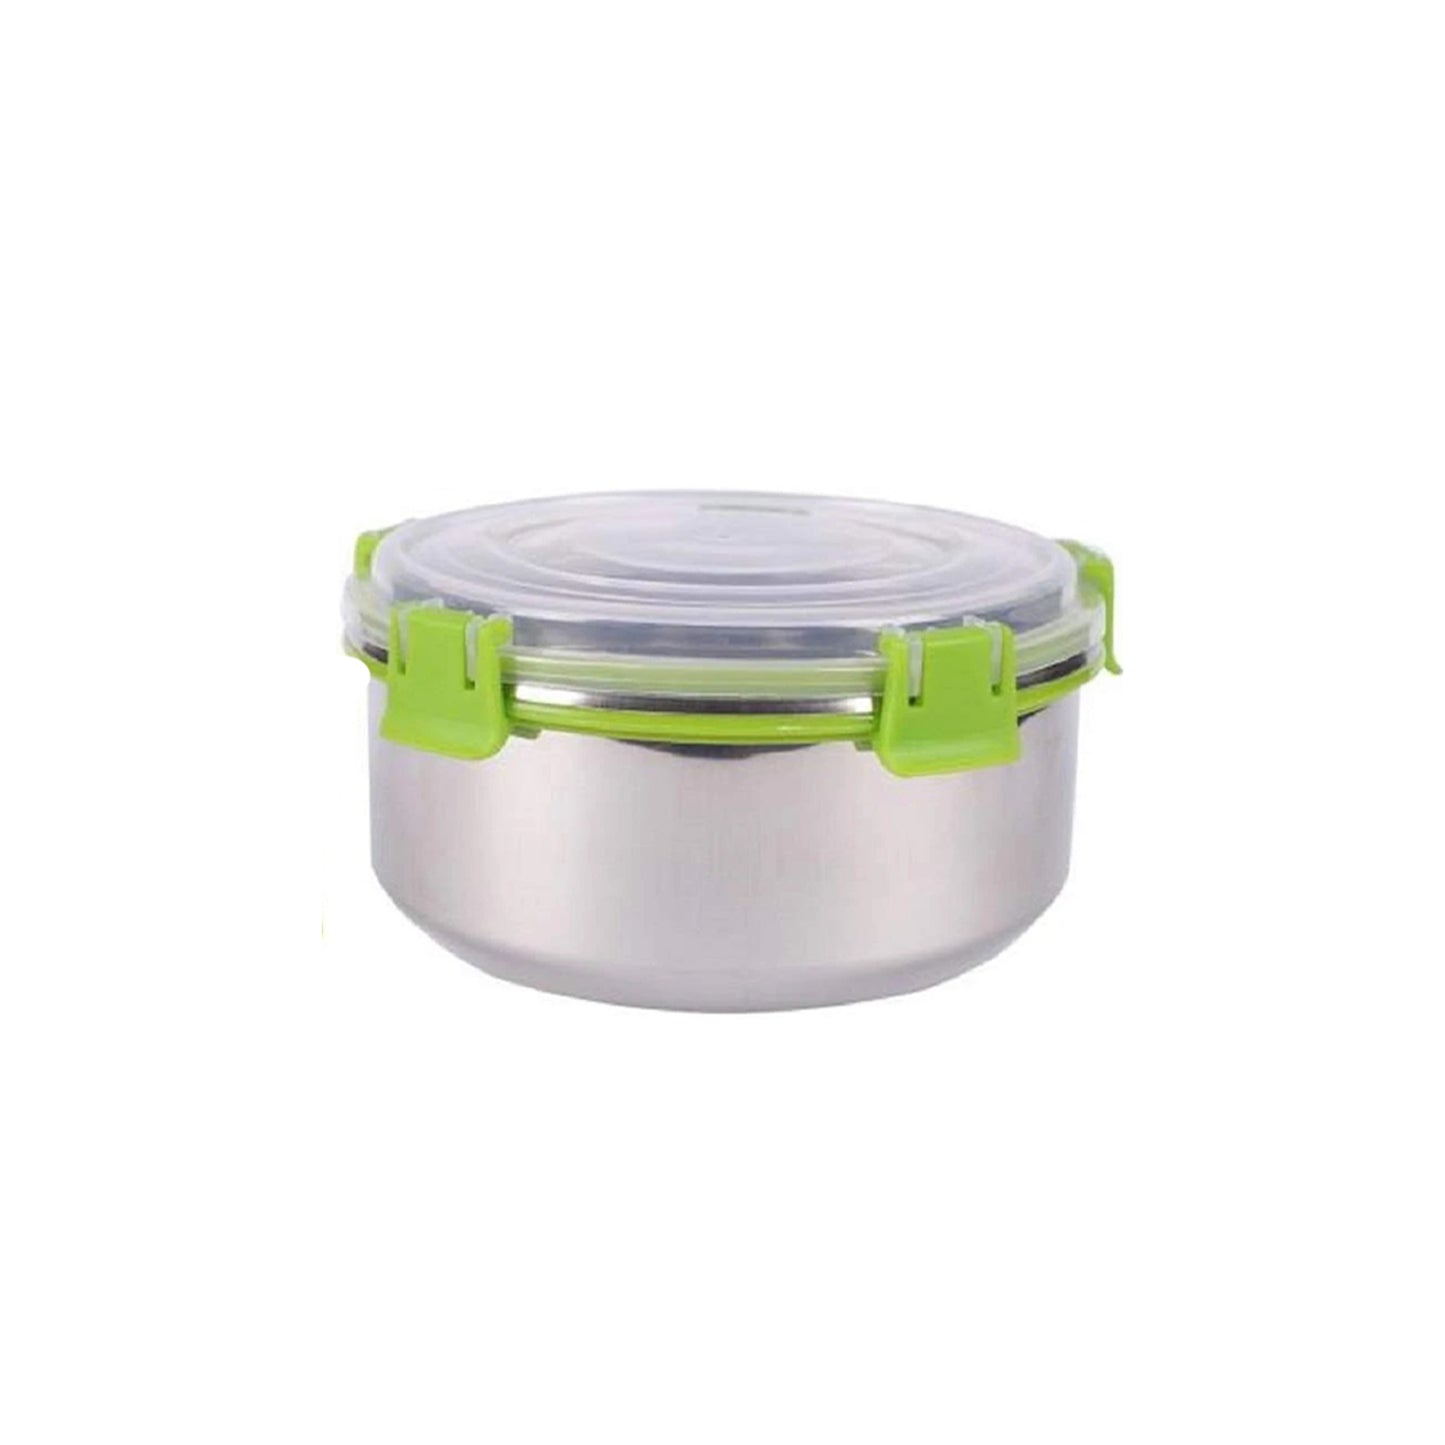 SWHF Stainless Steel Smart Lock Tiffin/Lunch Box (350 ml, 10 cm, Green)